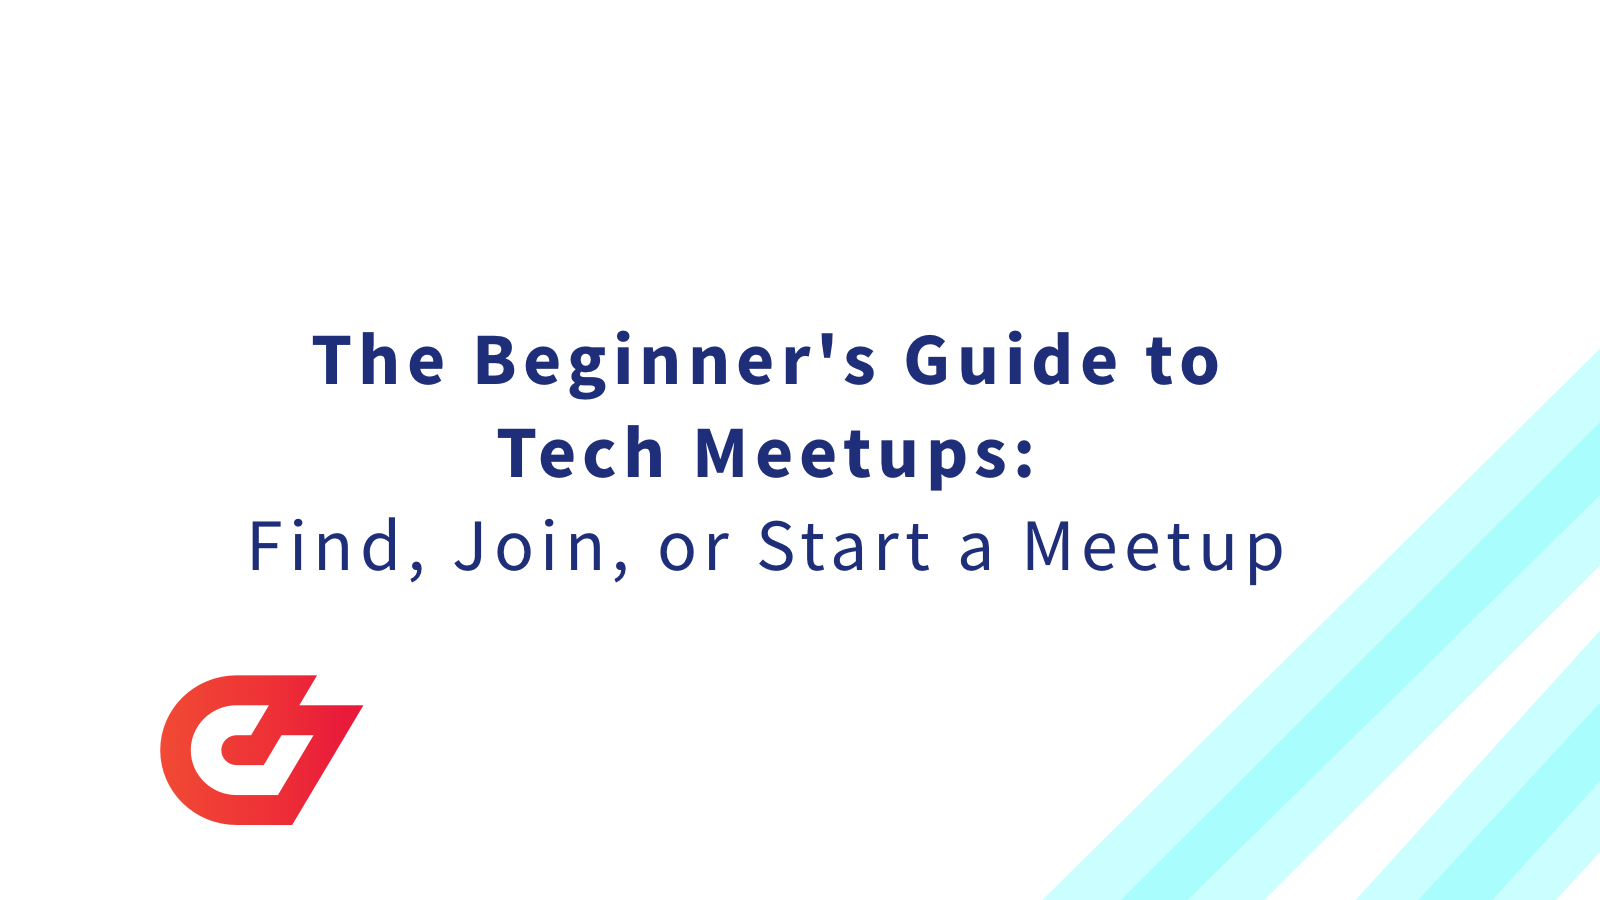 Looking to get involved in the tech meetup scene? We share how to find, join, and ace your first meetup experience! Plus, we share the step-by-step pr